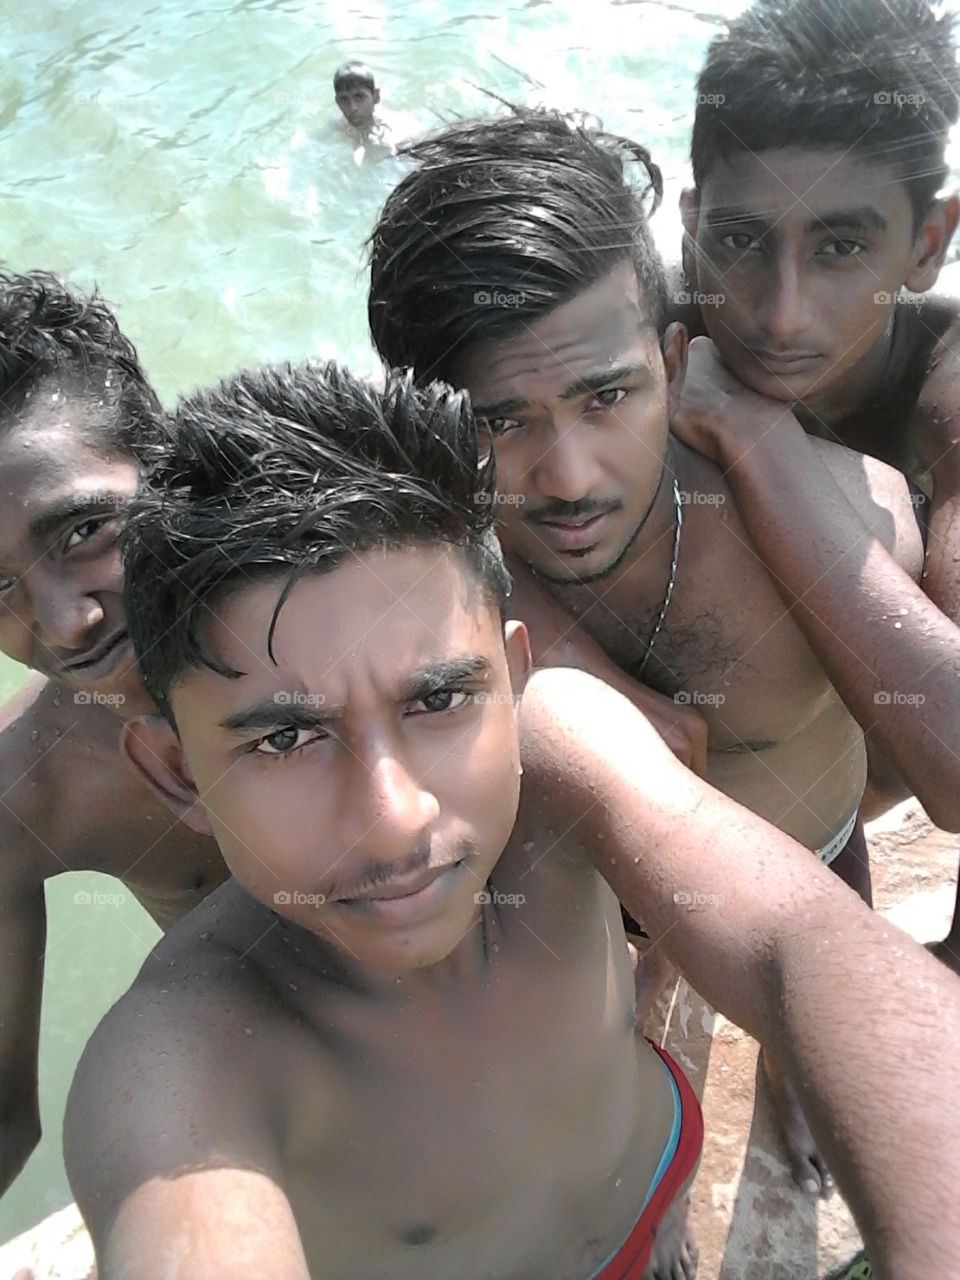 today enjoy with my friends in pool...